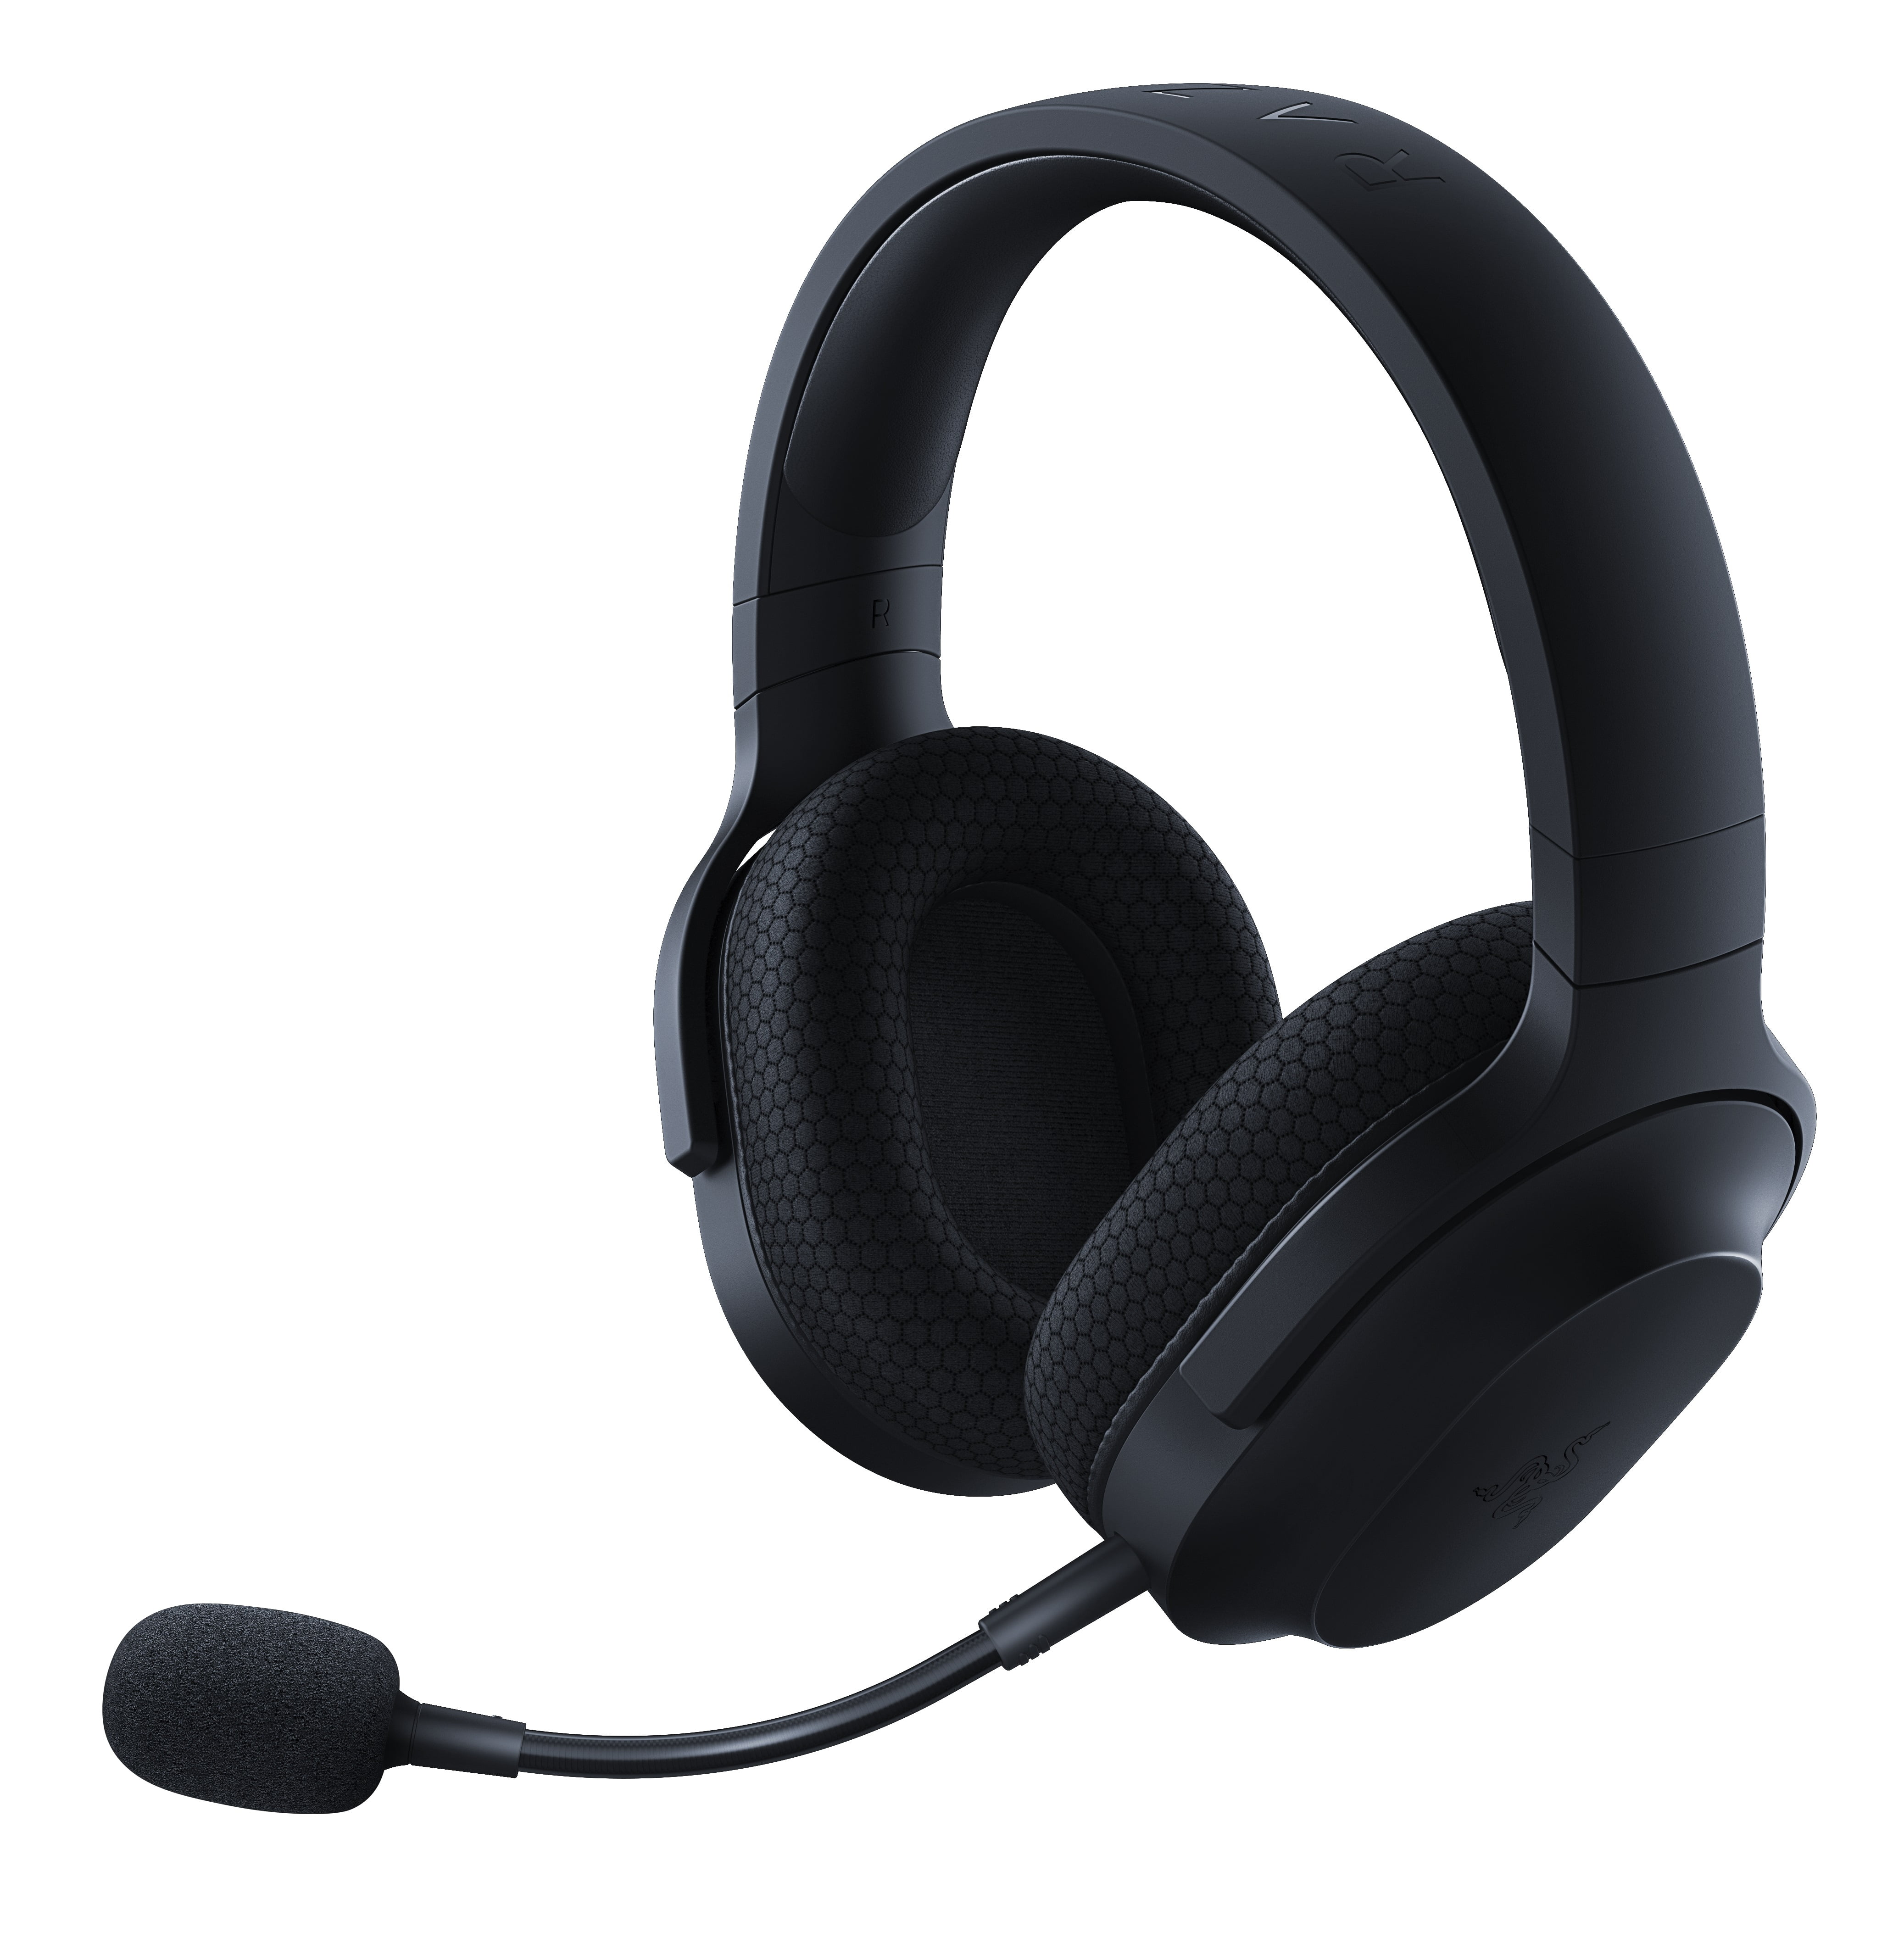 Tyr Tegne Til fods Razer Barracuda X Wireless Stereo Gaming and Mobile Headset for PC, PS5,  Nintendo Switch & Android, 2.4Ghz, Black - Walmart.com